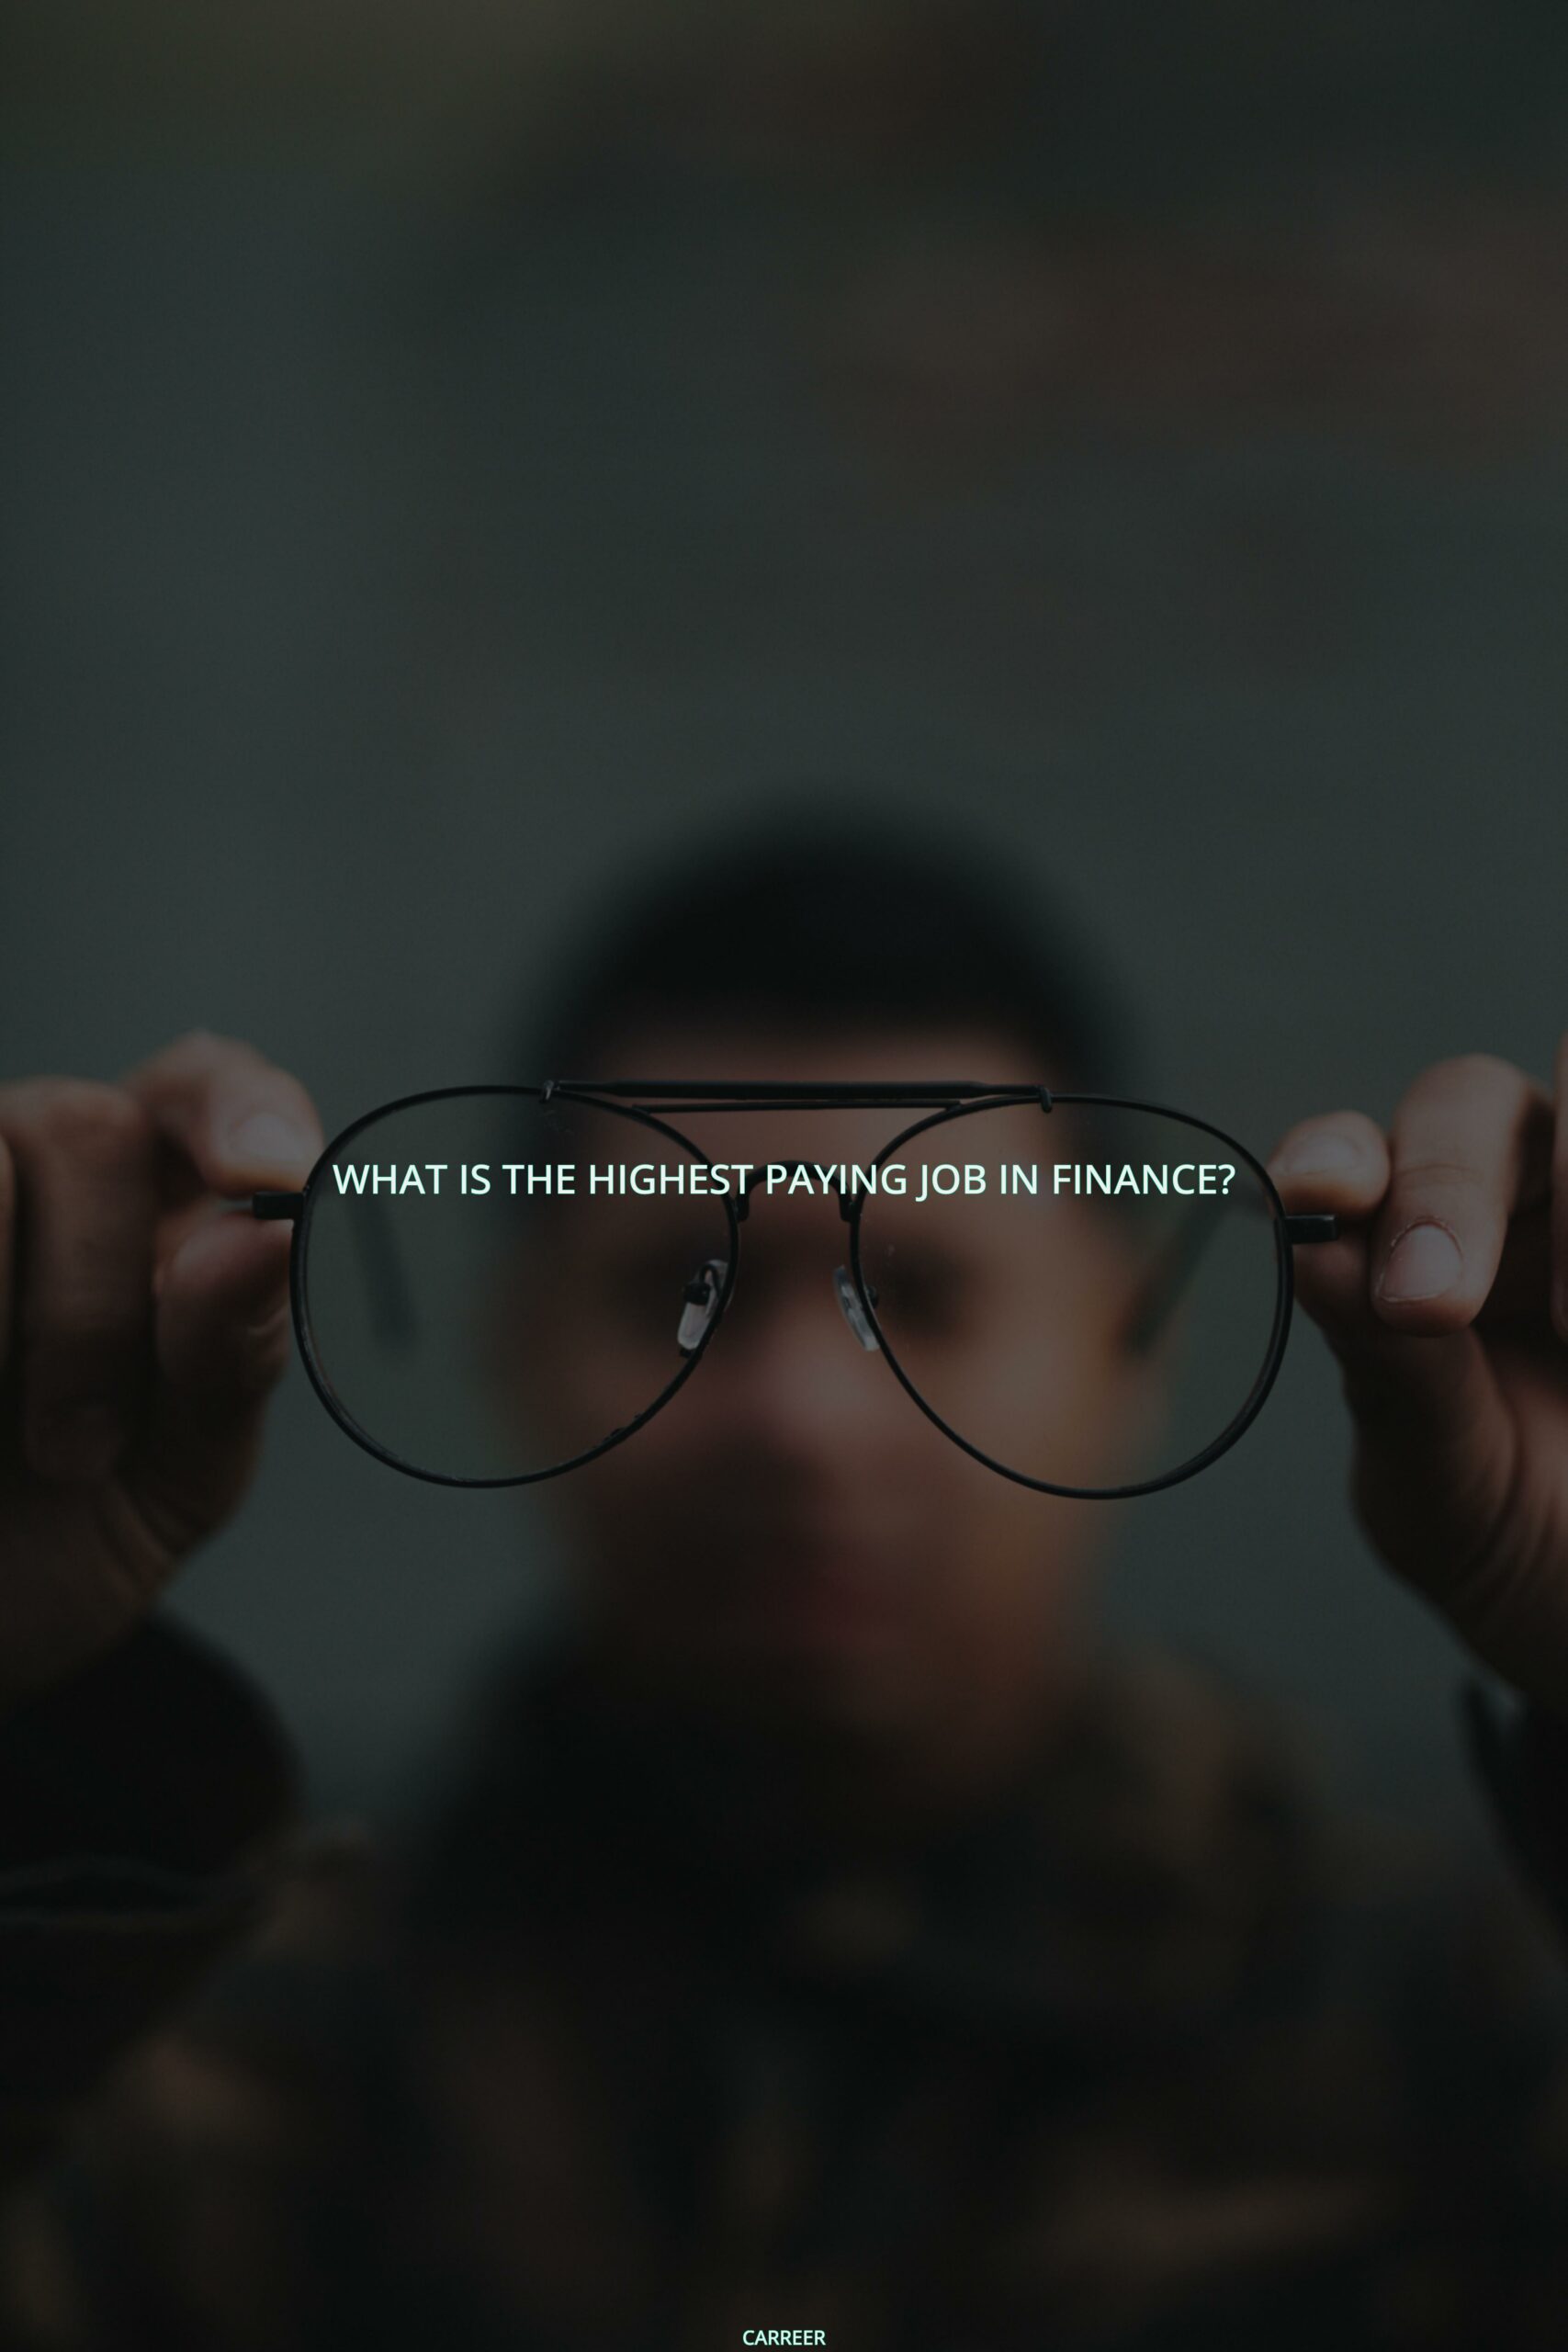 What is the highest paying job in finance?